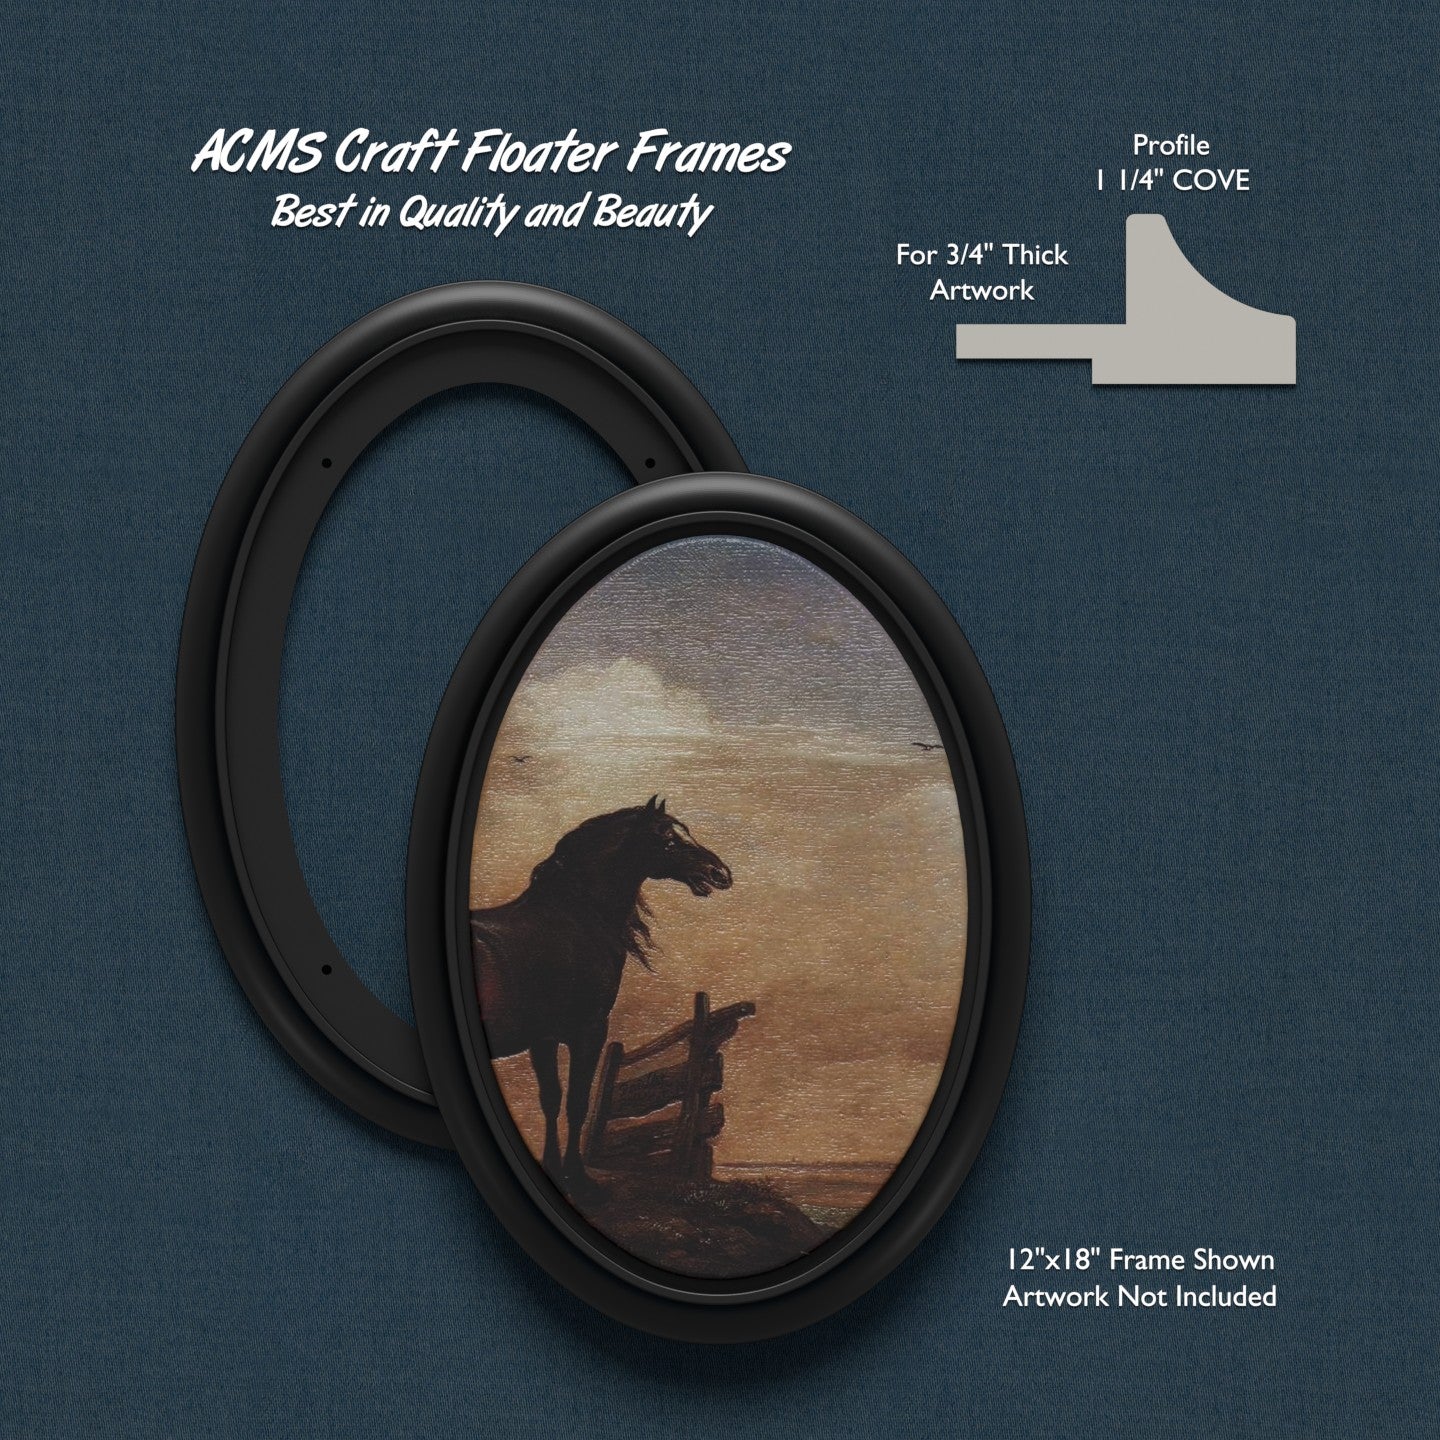 ACMS Oval Craft Floater Frame - For 3/4" Thick Artwork - Profile 1 1/4" COVE - 1 1/4" Thick Frame